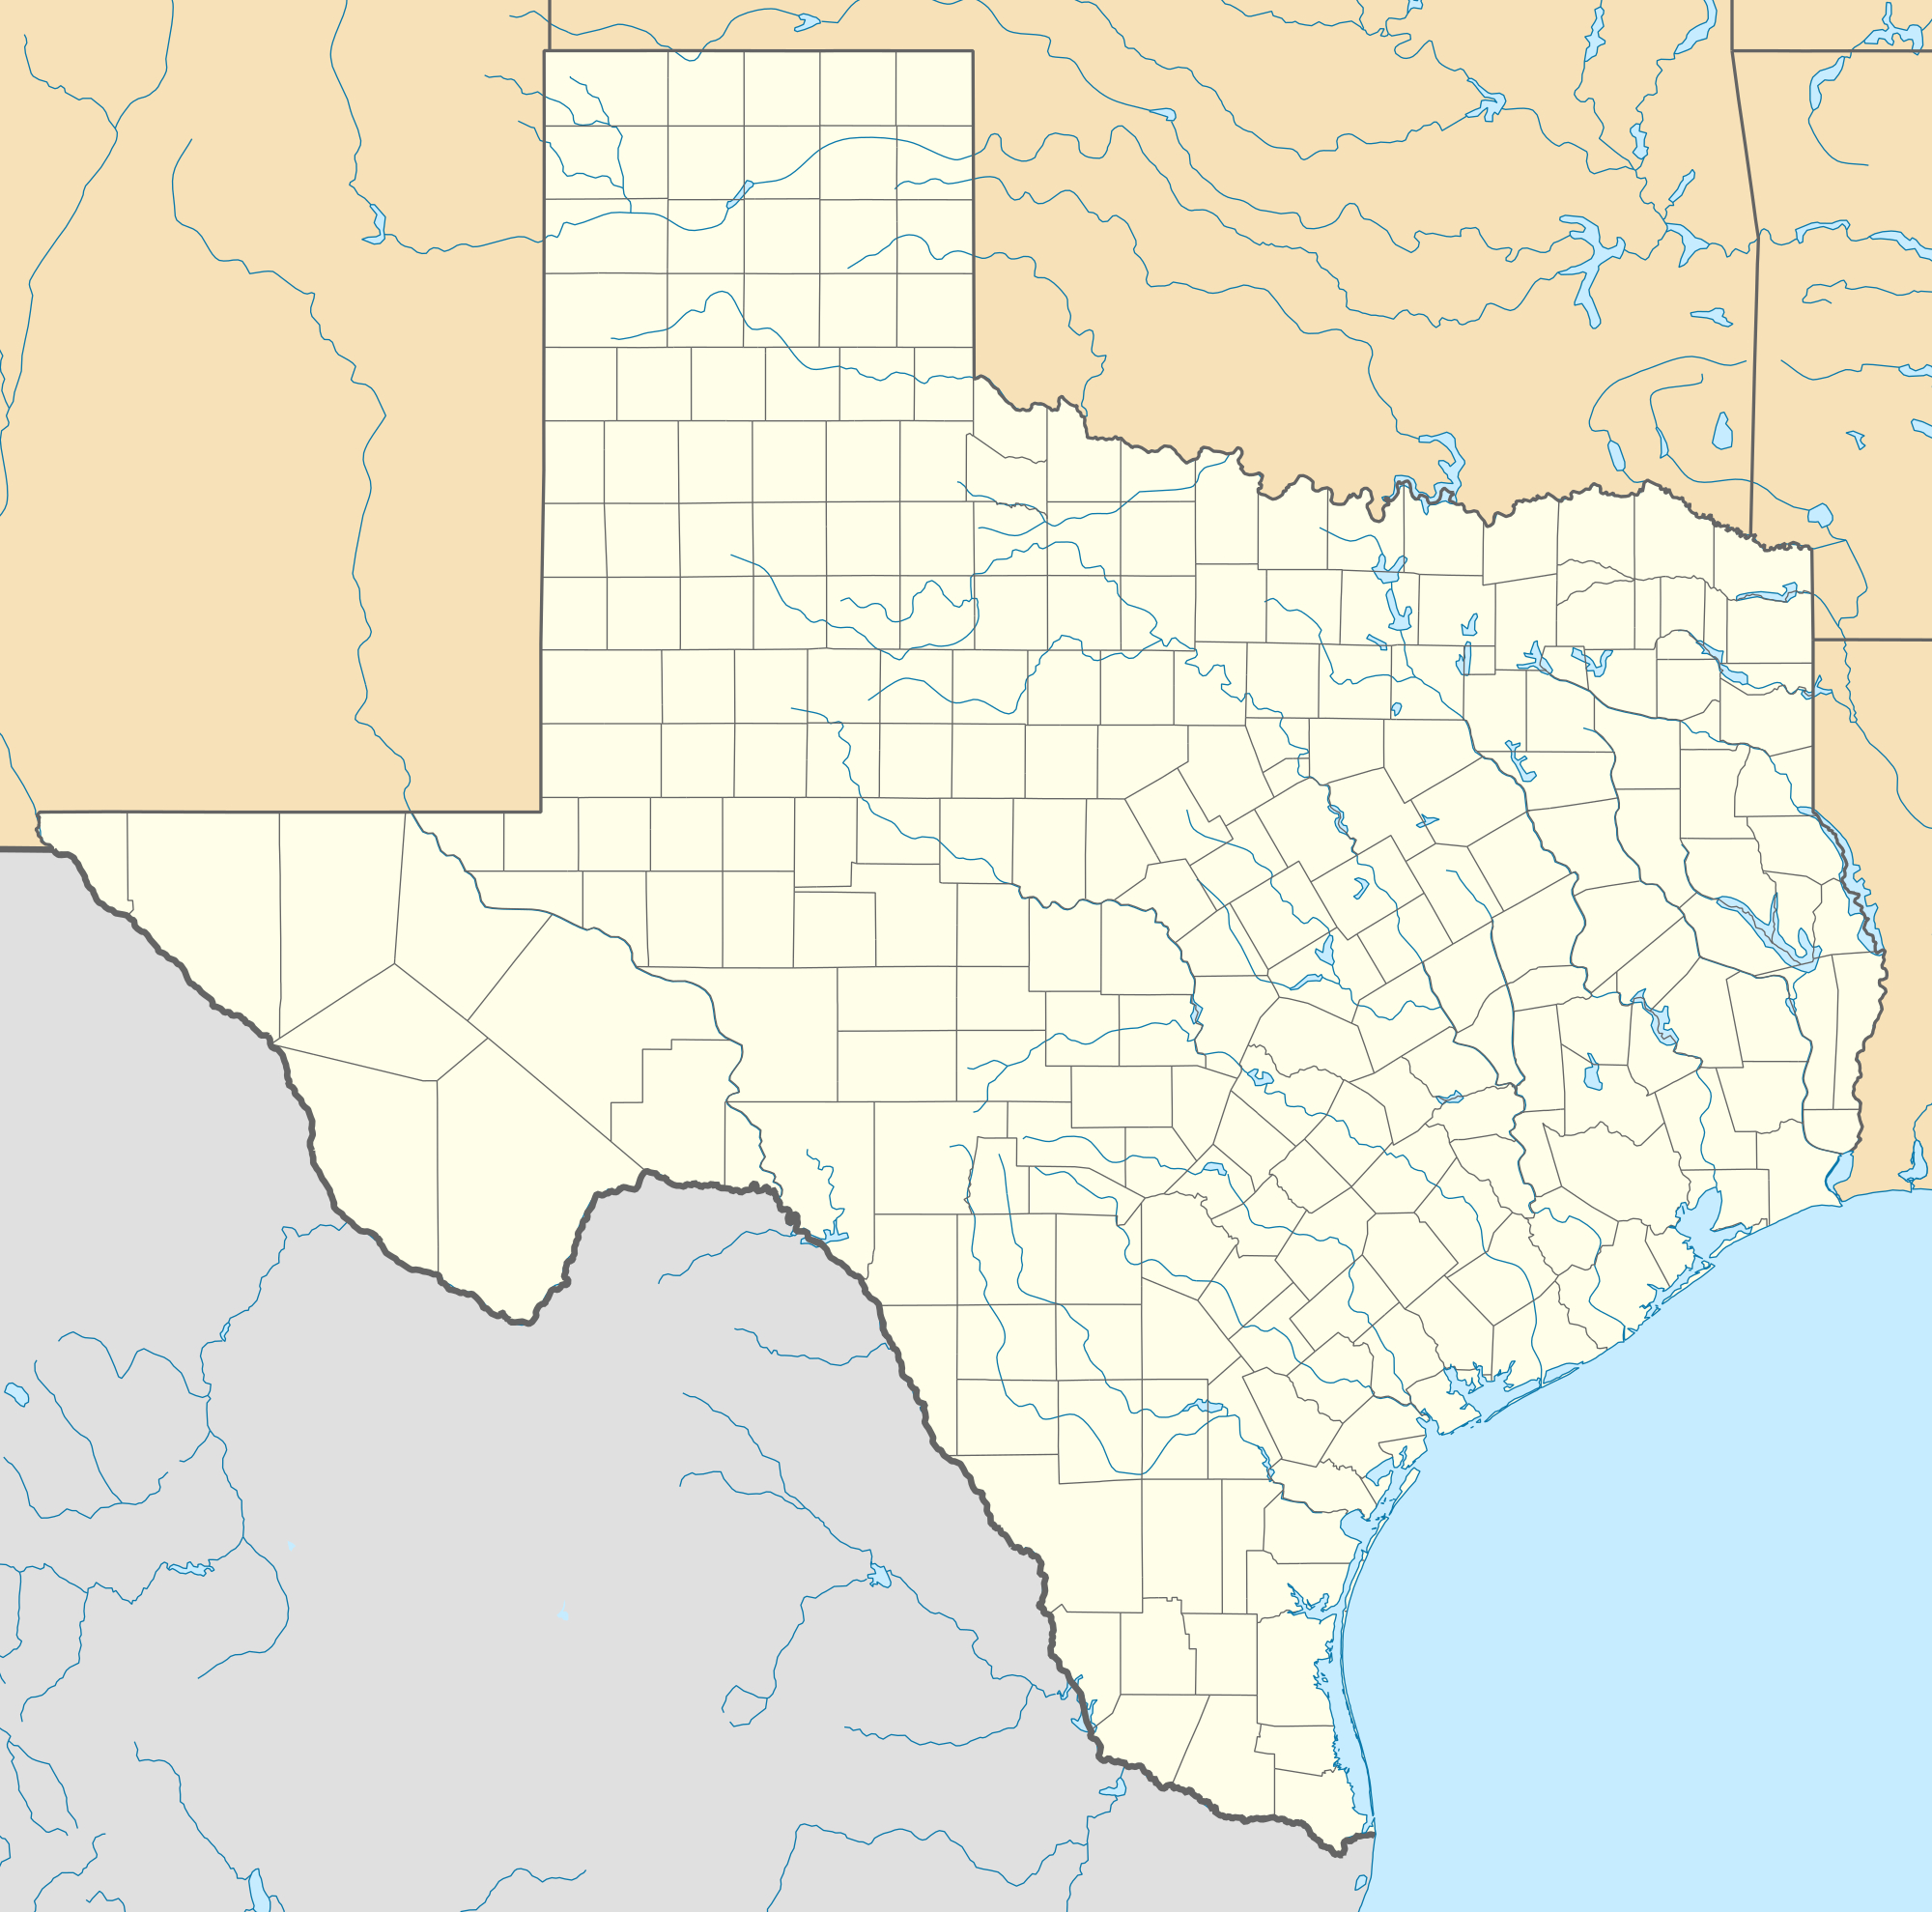 List Of Power Stations In Texas - Wikipedia - Power Plants In Texas Map